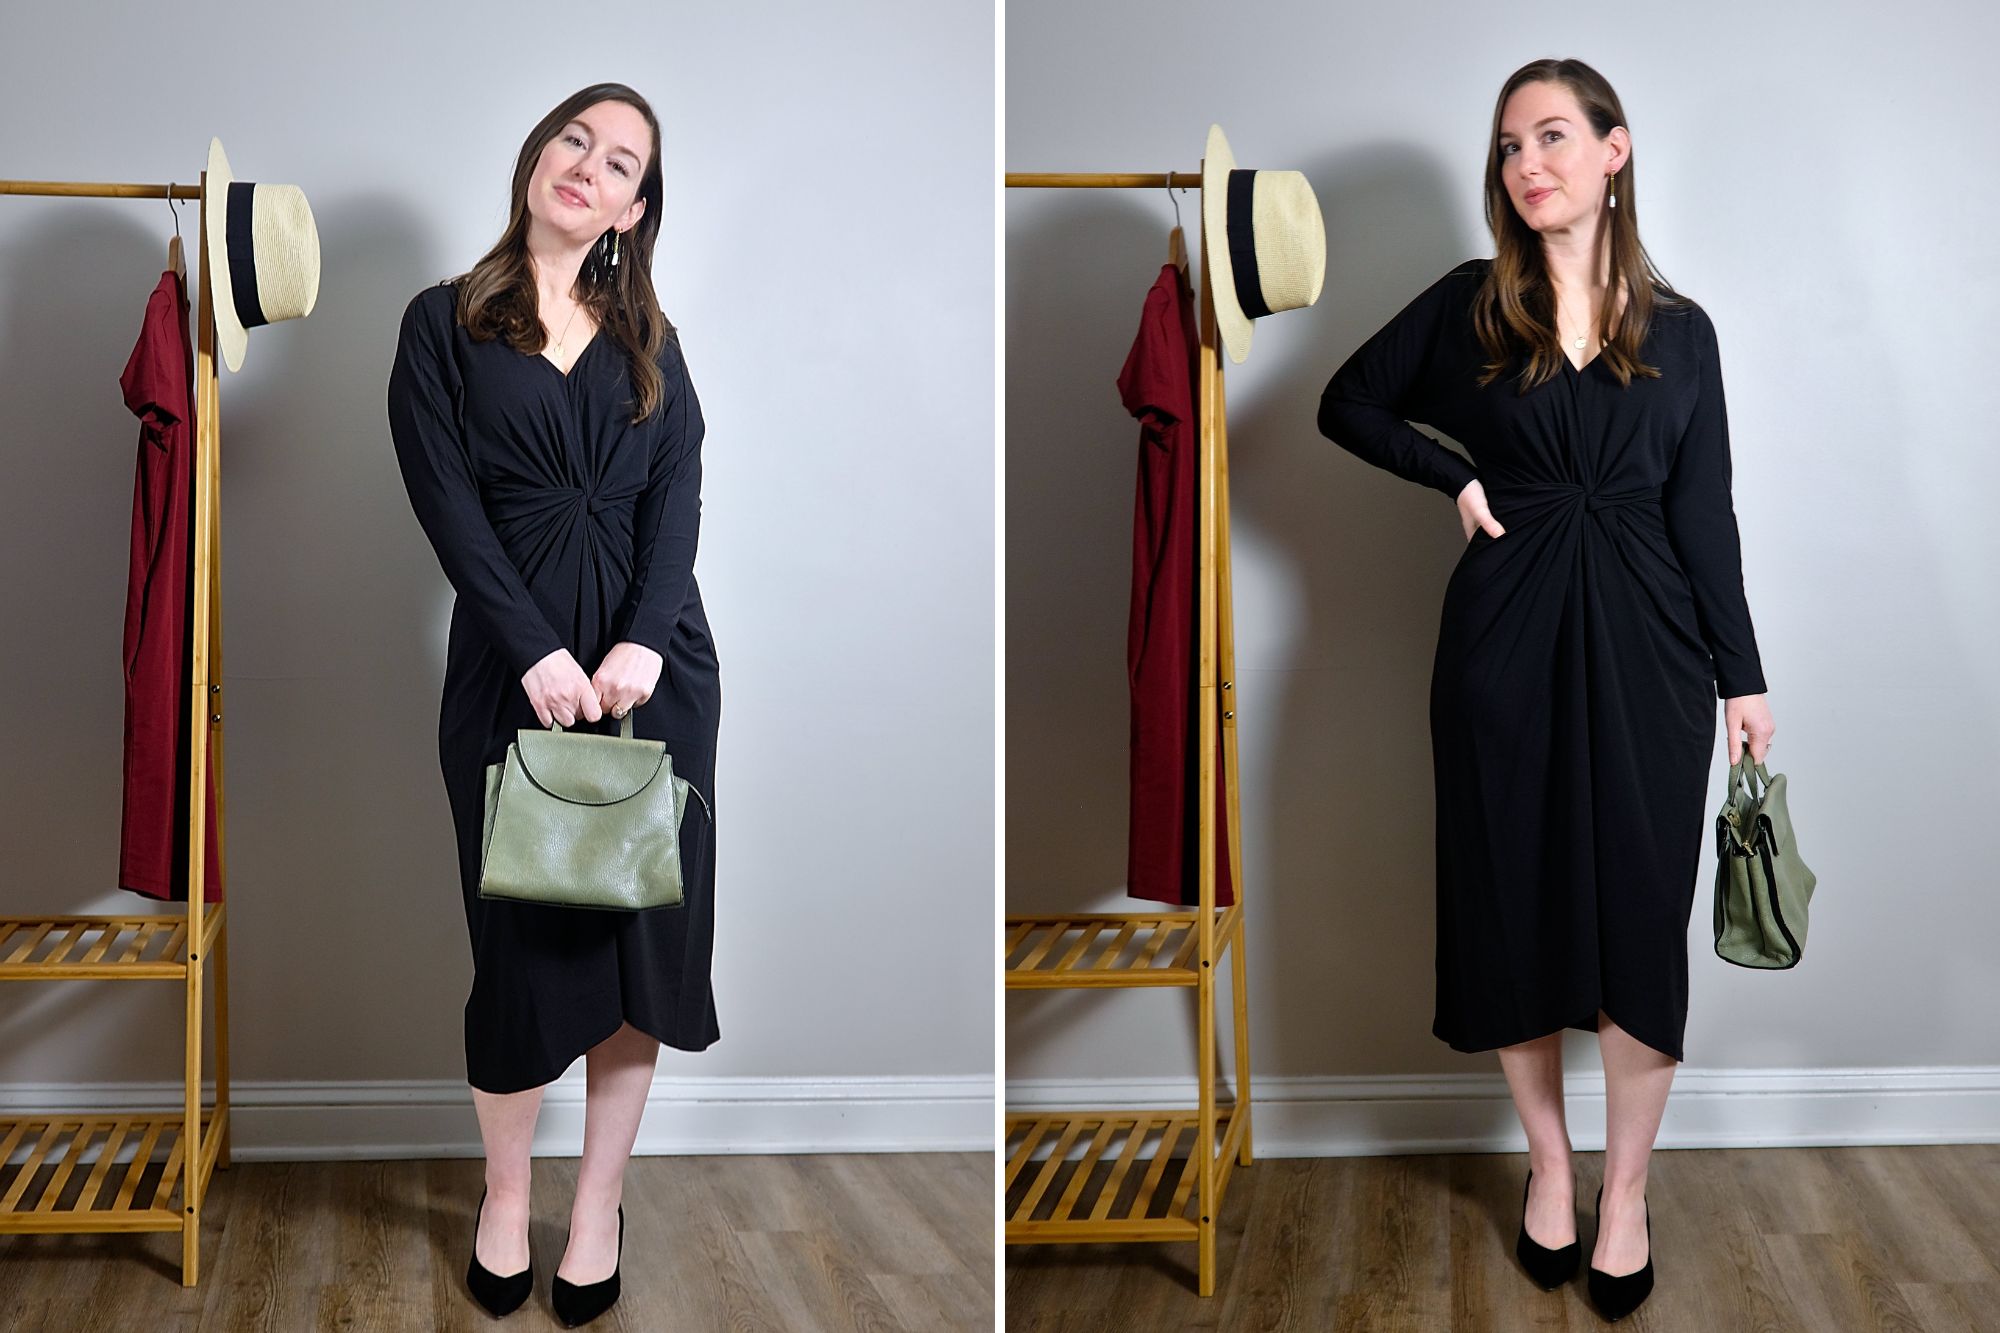 Alyssa wears the Plunge Neck Twist Dress from Universal Standard with heels and a green purse